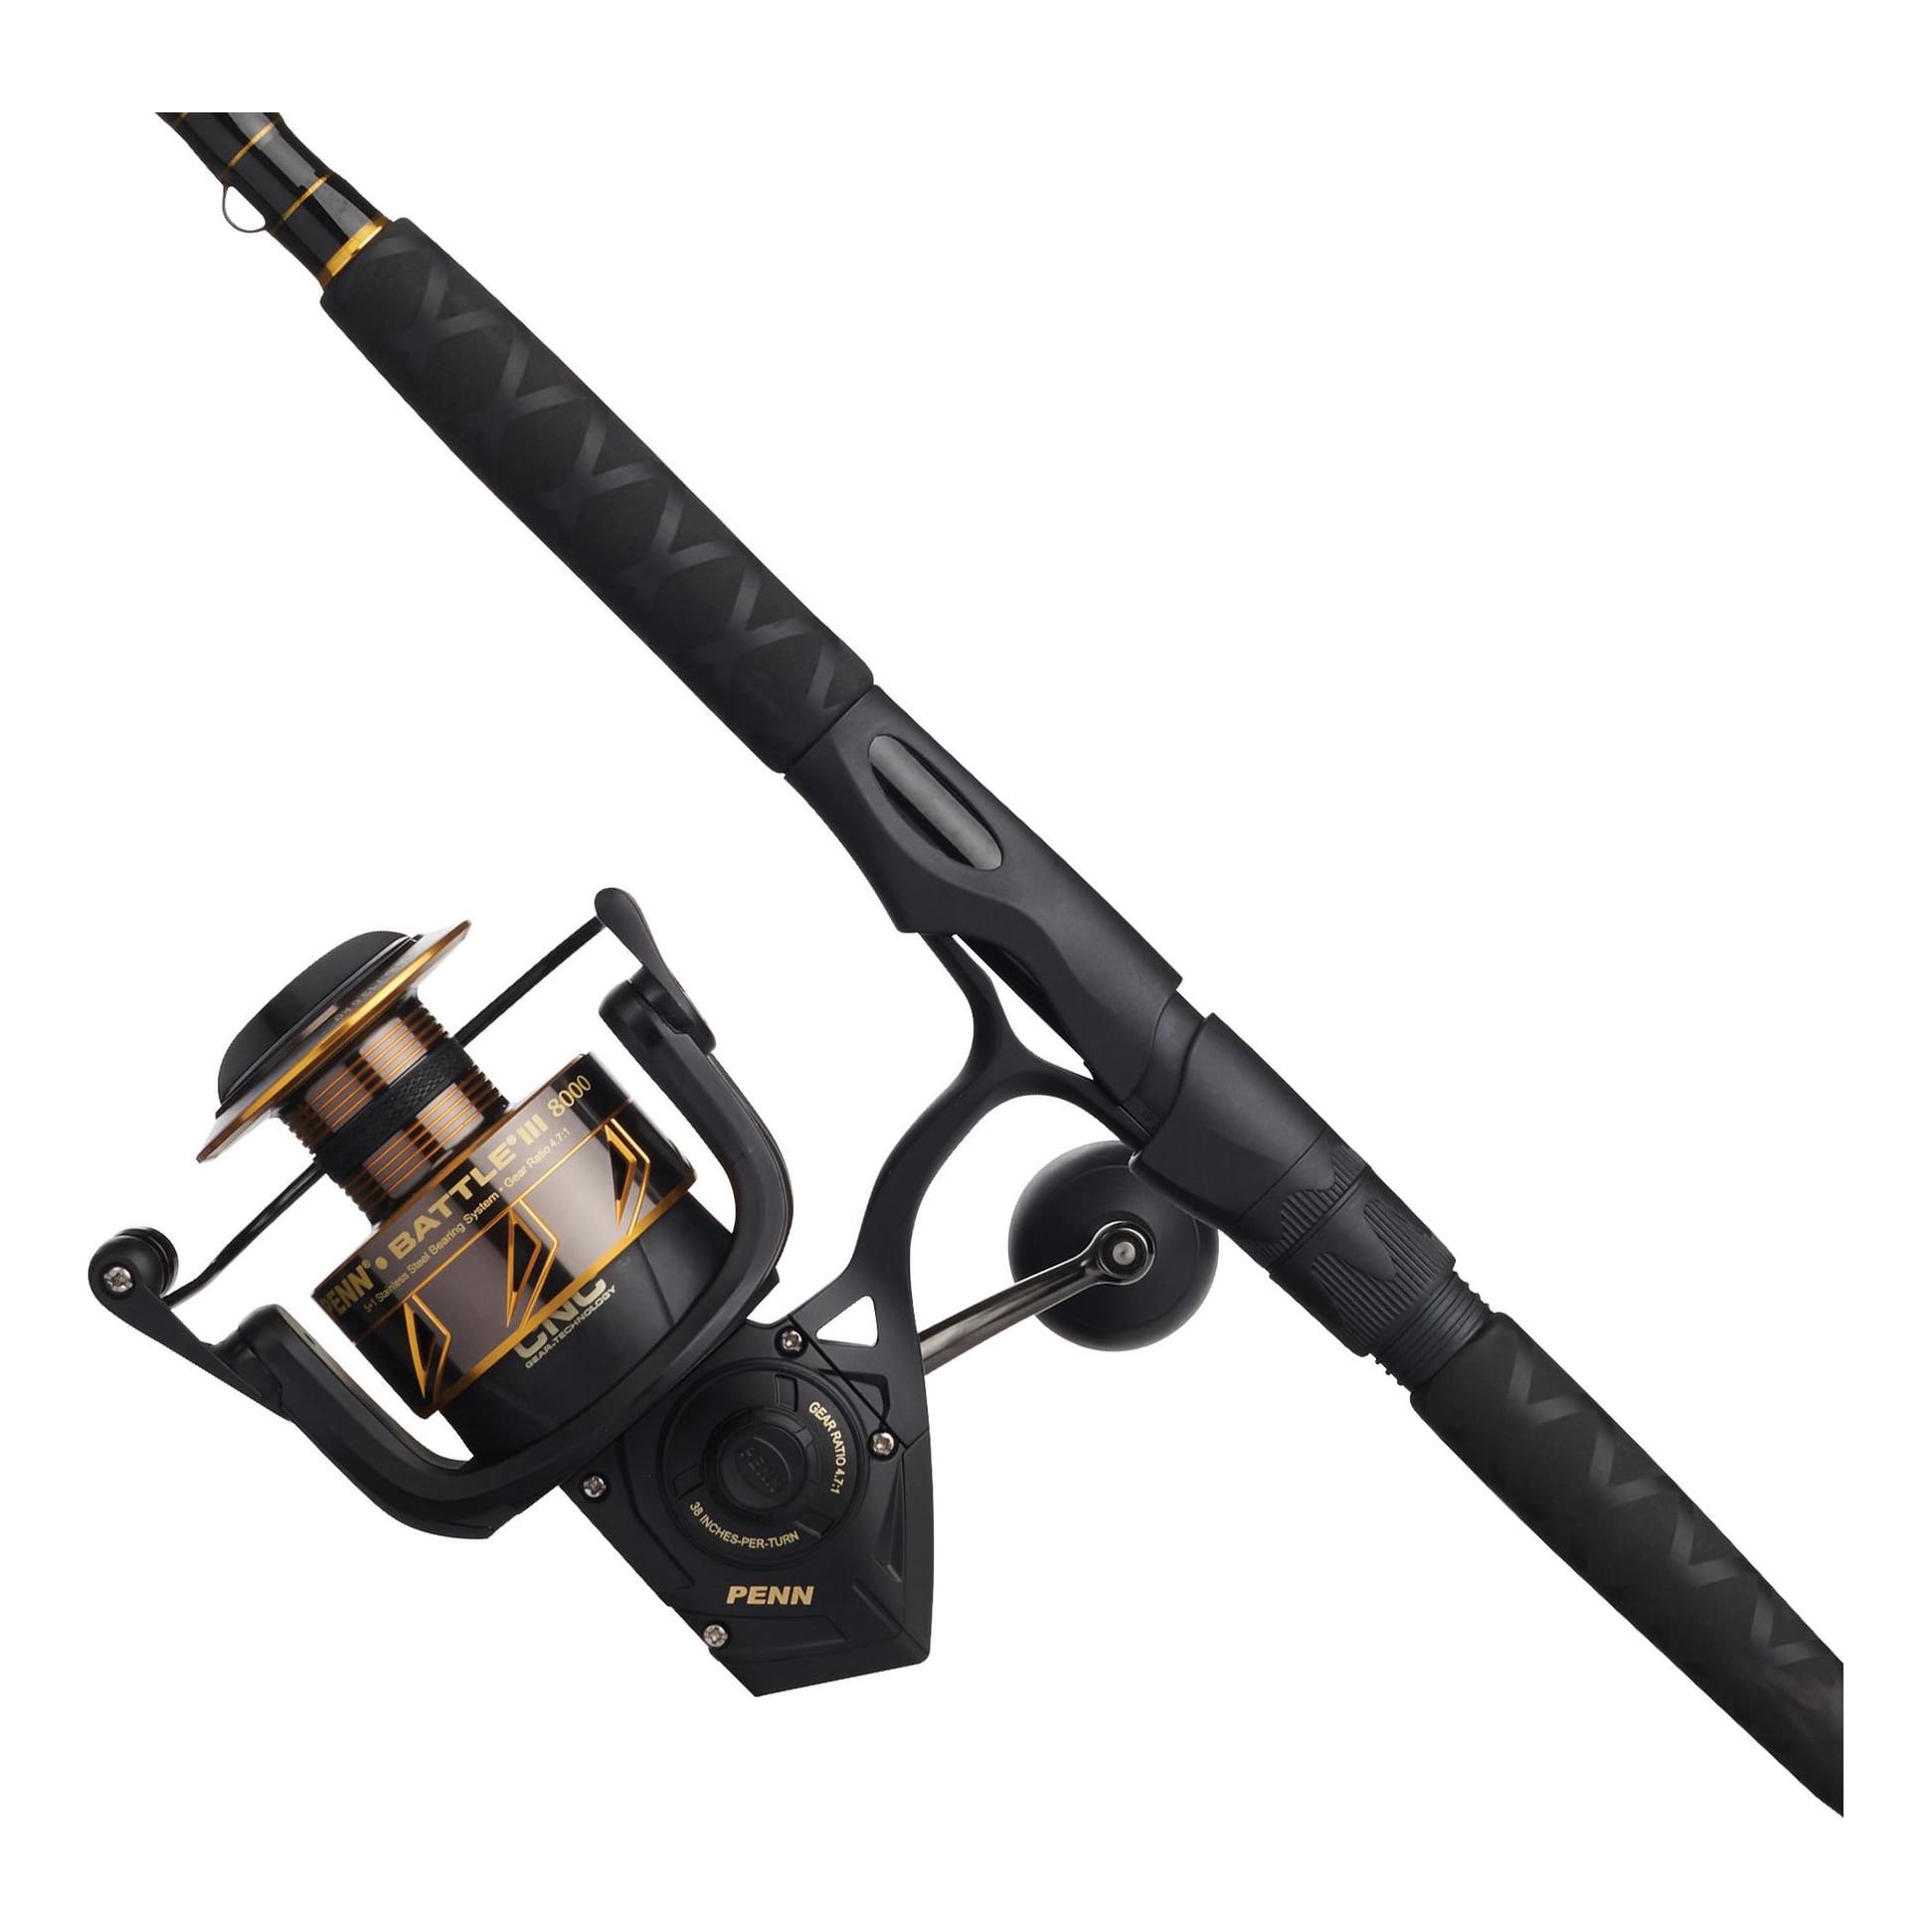 PENN Battle Spinning Reel And Fishing Rod Combo Kit With Spare Spool And Reel Cover, Black, 6000 - 9 - Medium Heavy - 2pc